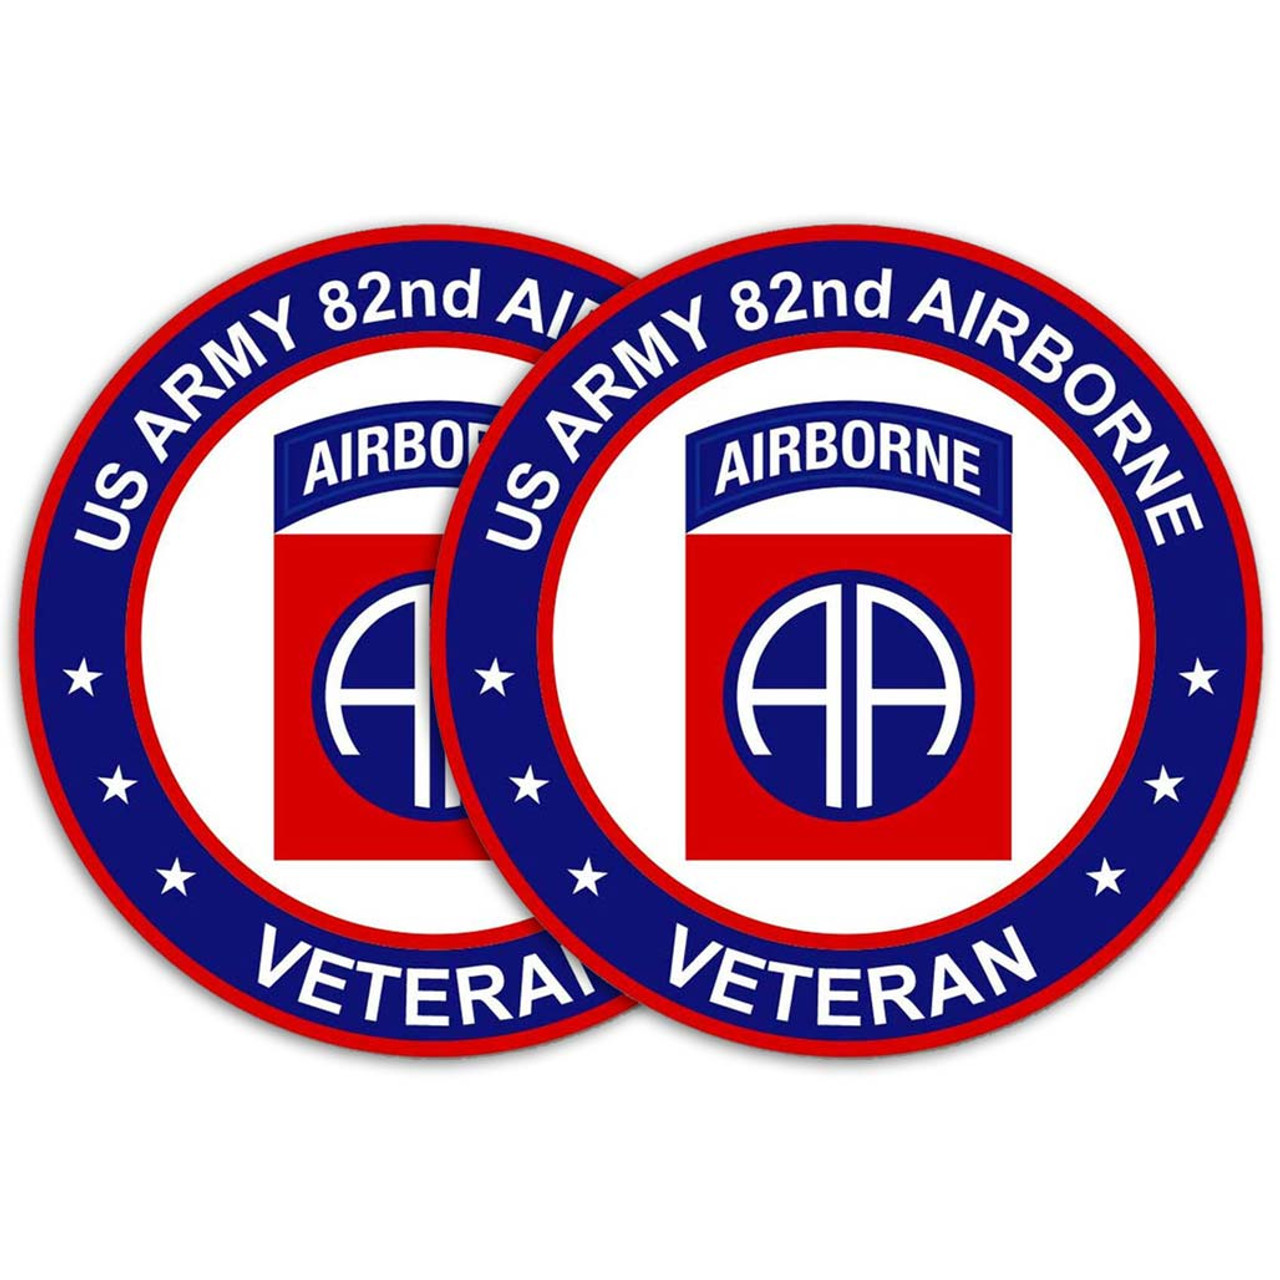 Army Veteran Circle Decal Sticker with 82nd Airborne Graphic Quantity of (2): illustration of decals